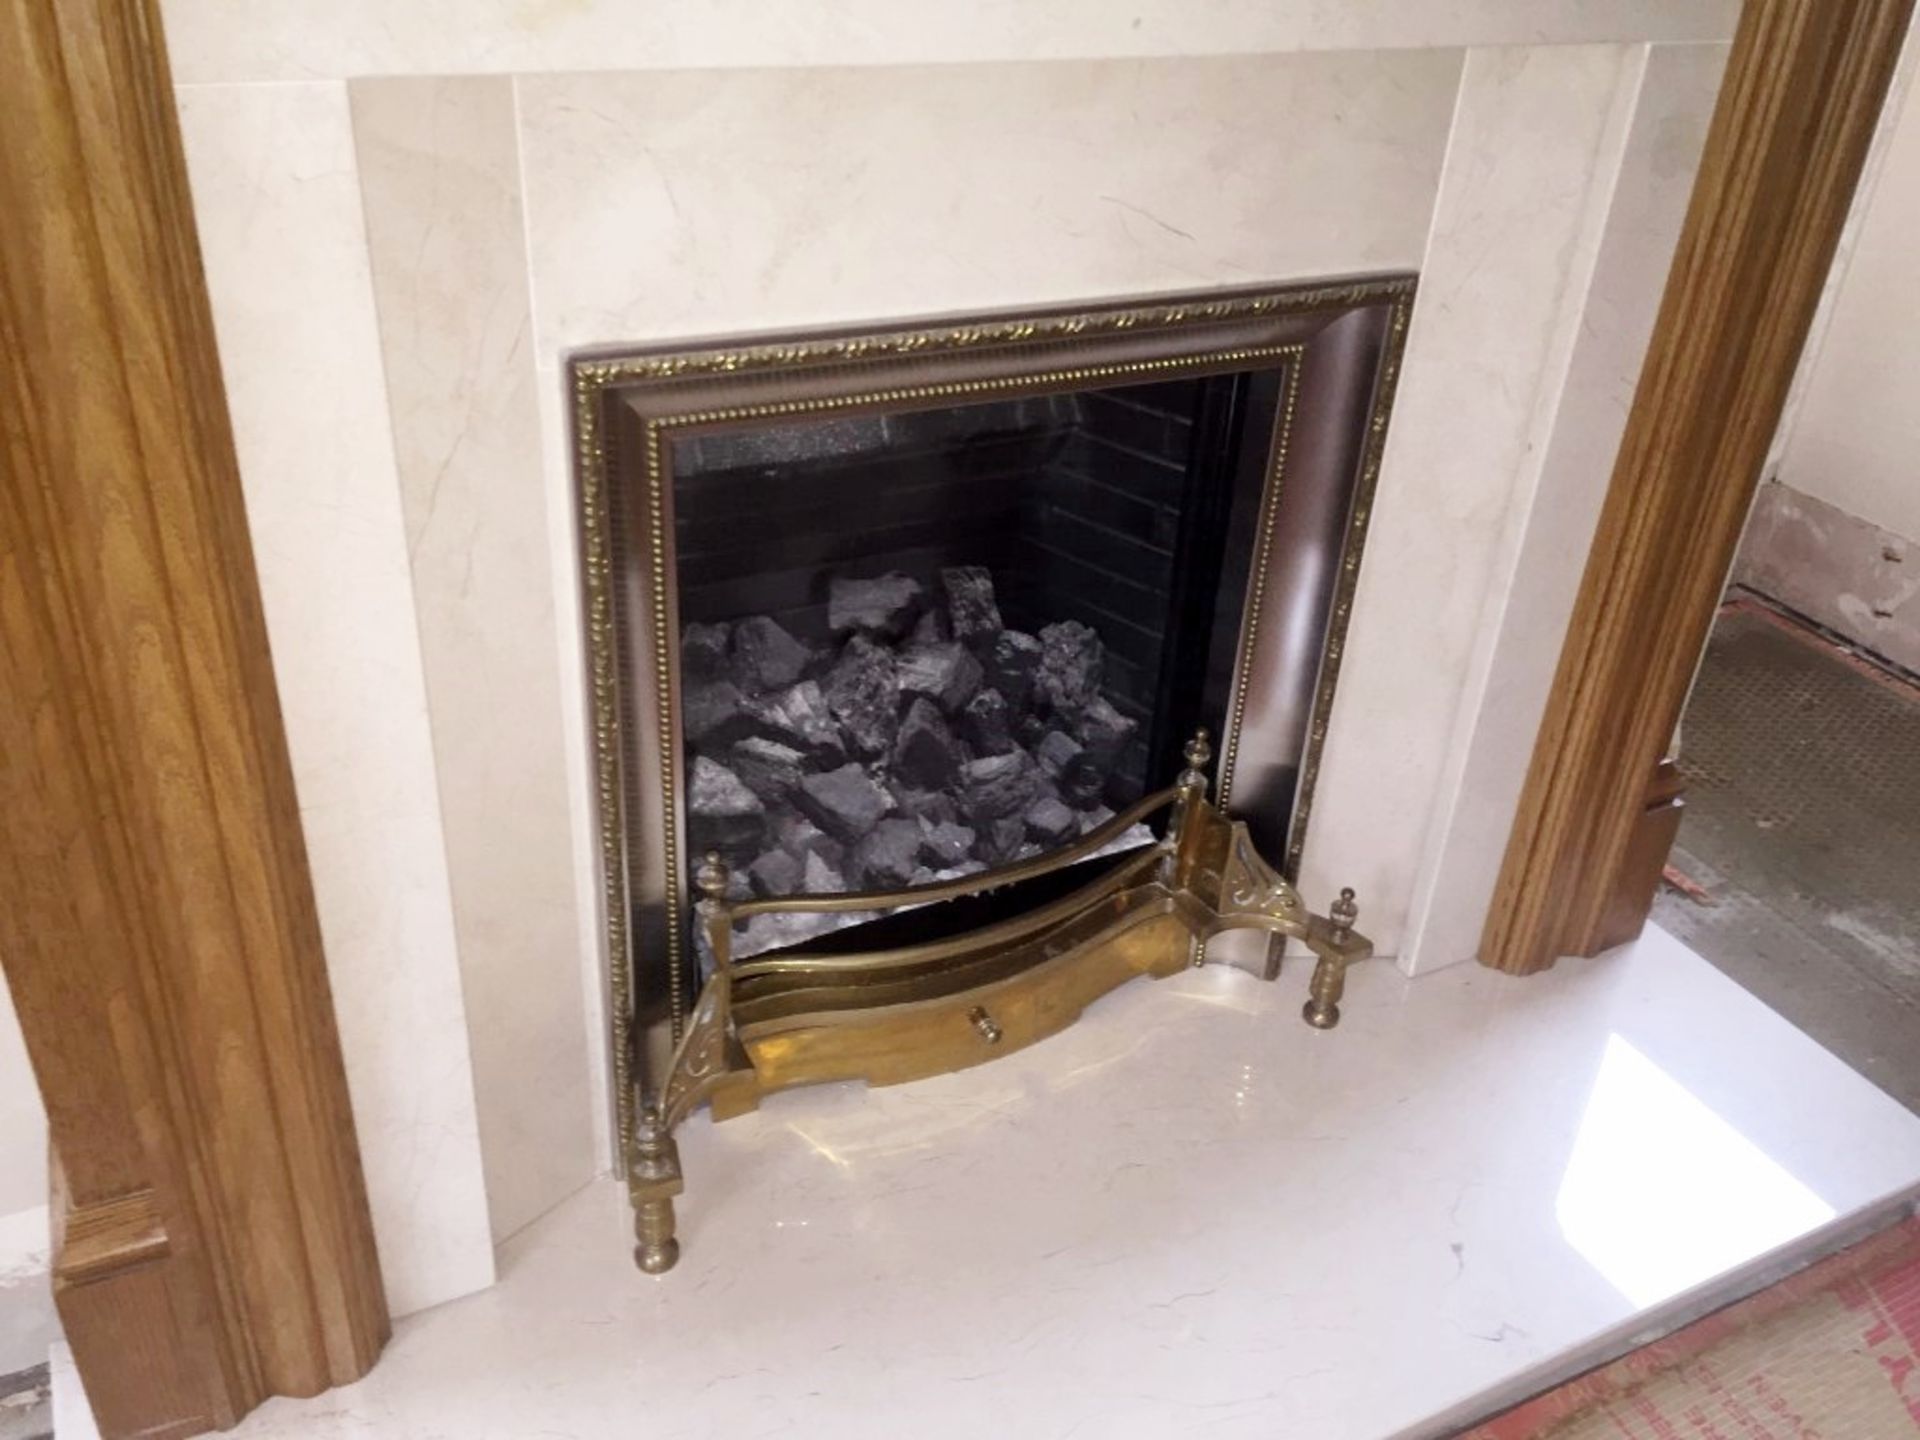 1 x Fire With Oak Surround, Marble Back Panel And Hearth - Dimensions: 137cm x Height 124cm – Hearth - Image 12 of 12